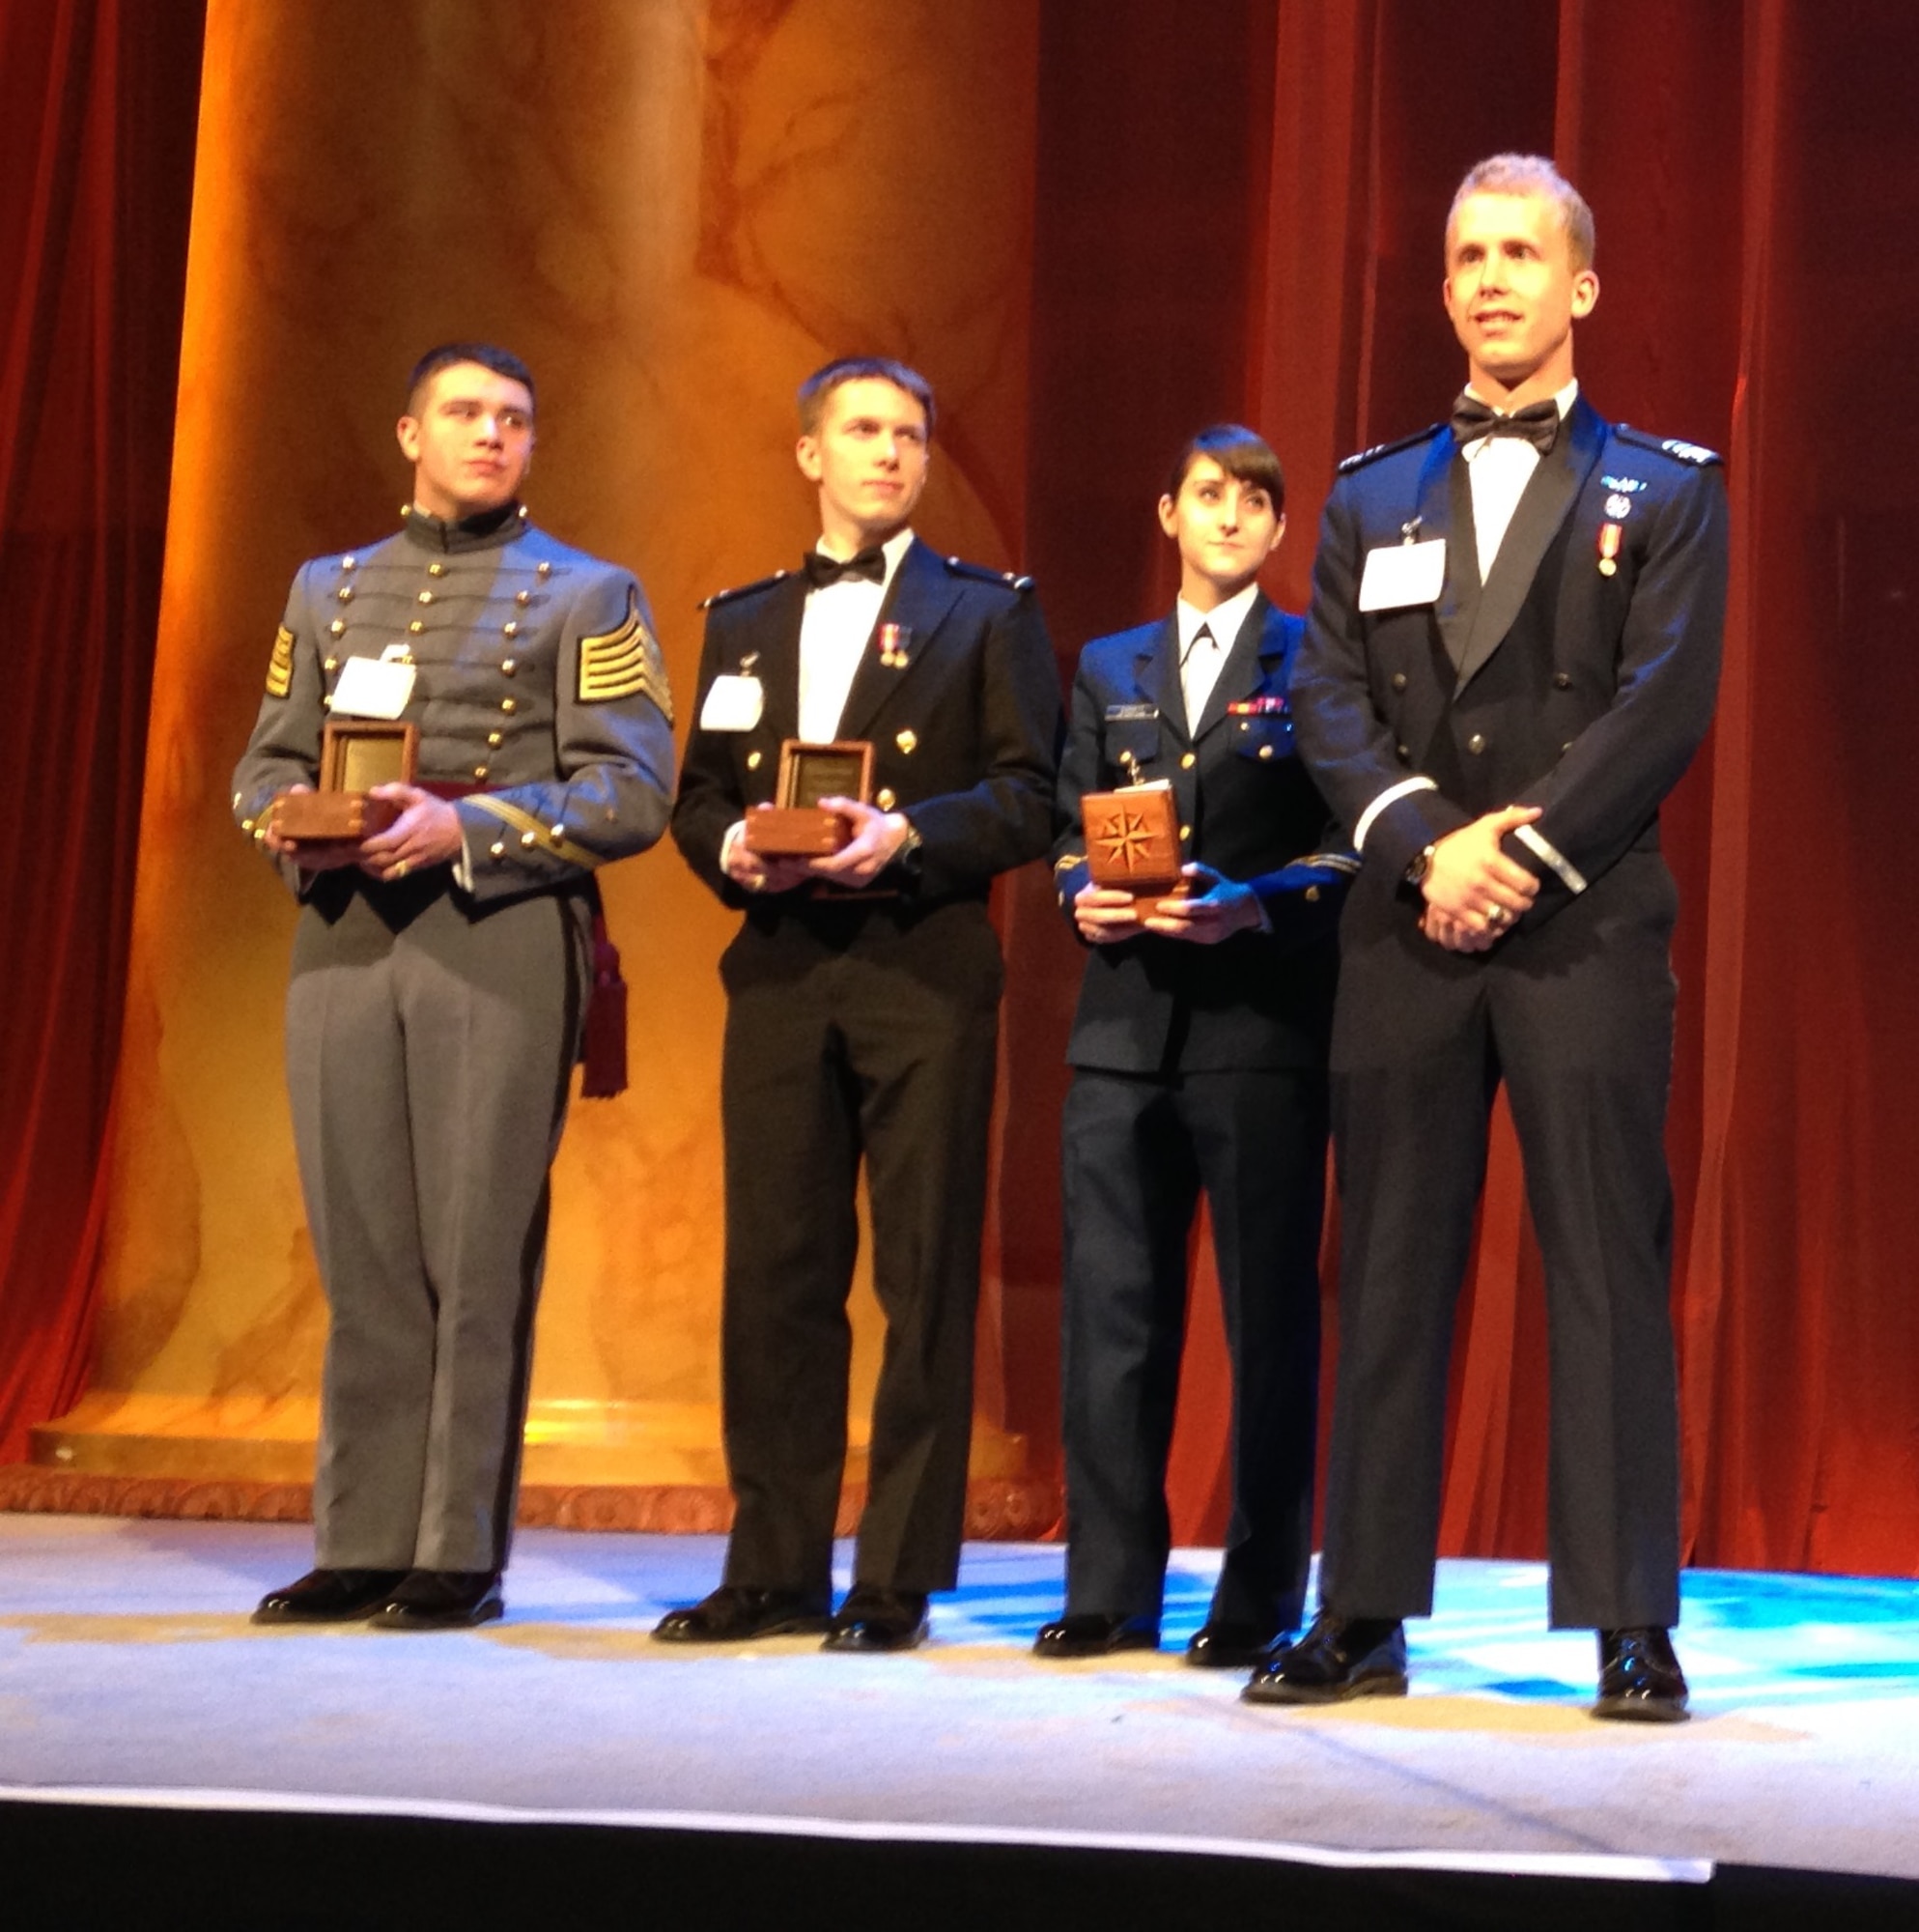 Cadet 1st Class Christopher Shannon (right) receives the 2014 Tomorrow's Leaders Award during the 57th Annual Laureates Awards March 6 in Washington, D.C. Shannon is the Academy Aeronautics Department's top cadet; he holds a 3.98 grade point average and is in the top 1 percent on the 2014 graduating class. (Air Force courtesy photo) 
